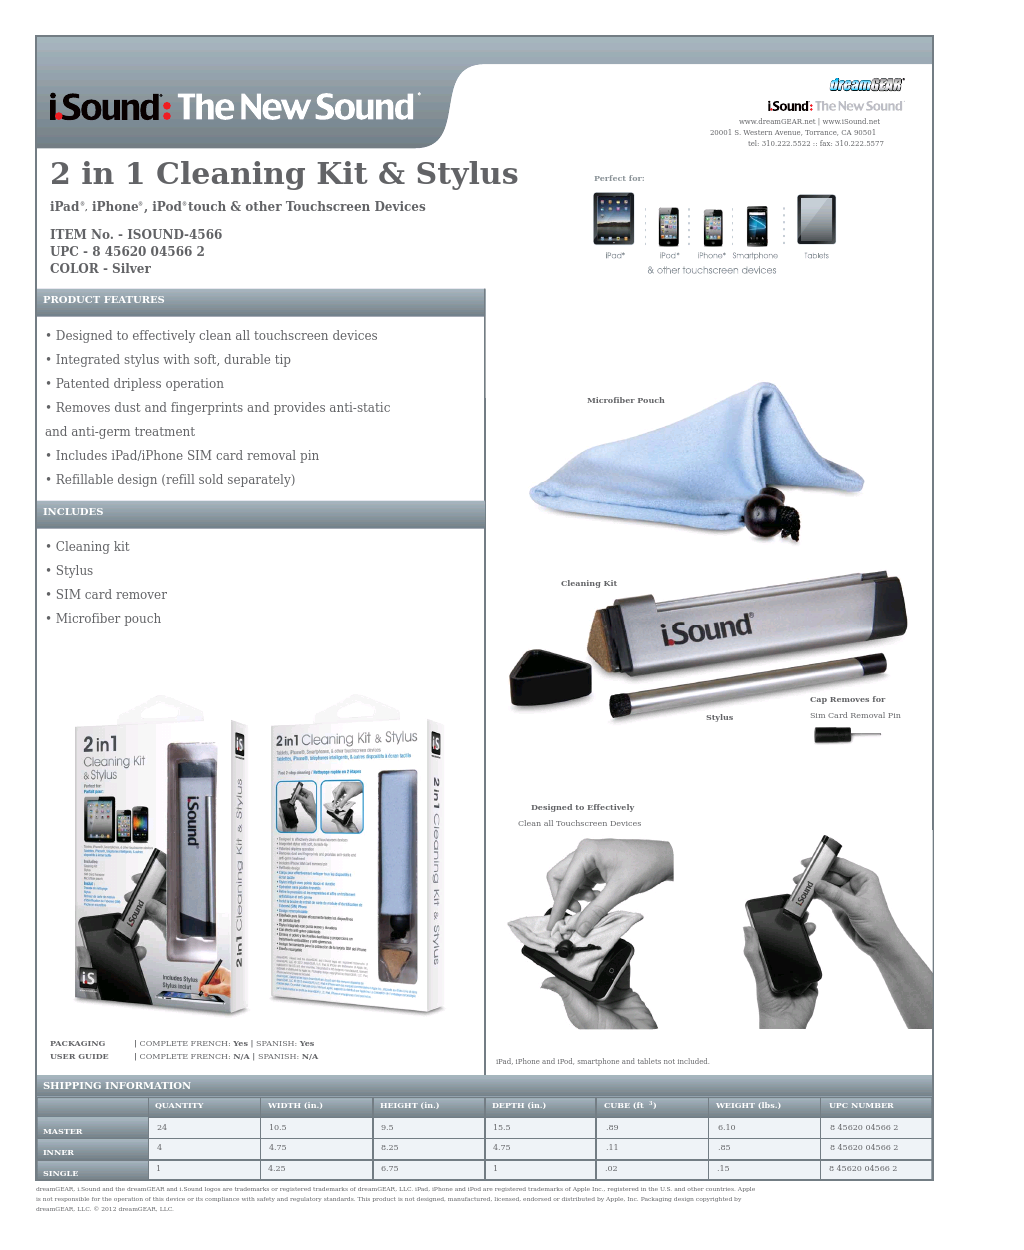 2 in 1 Cleaning Kit & Stylus - Sell Sheet